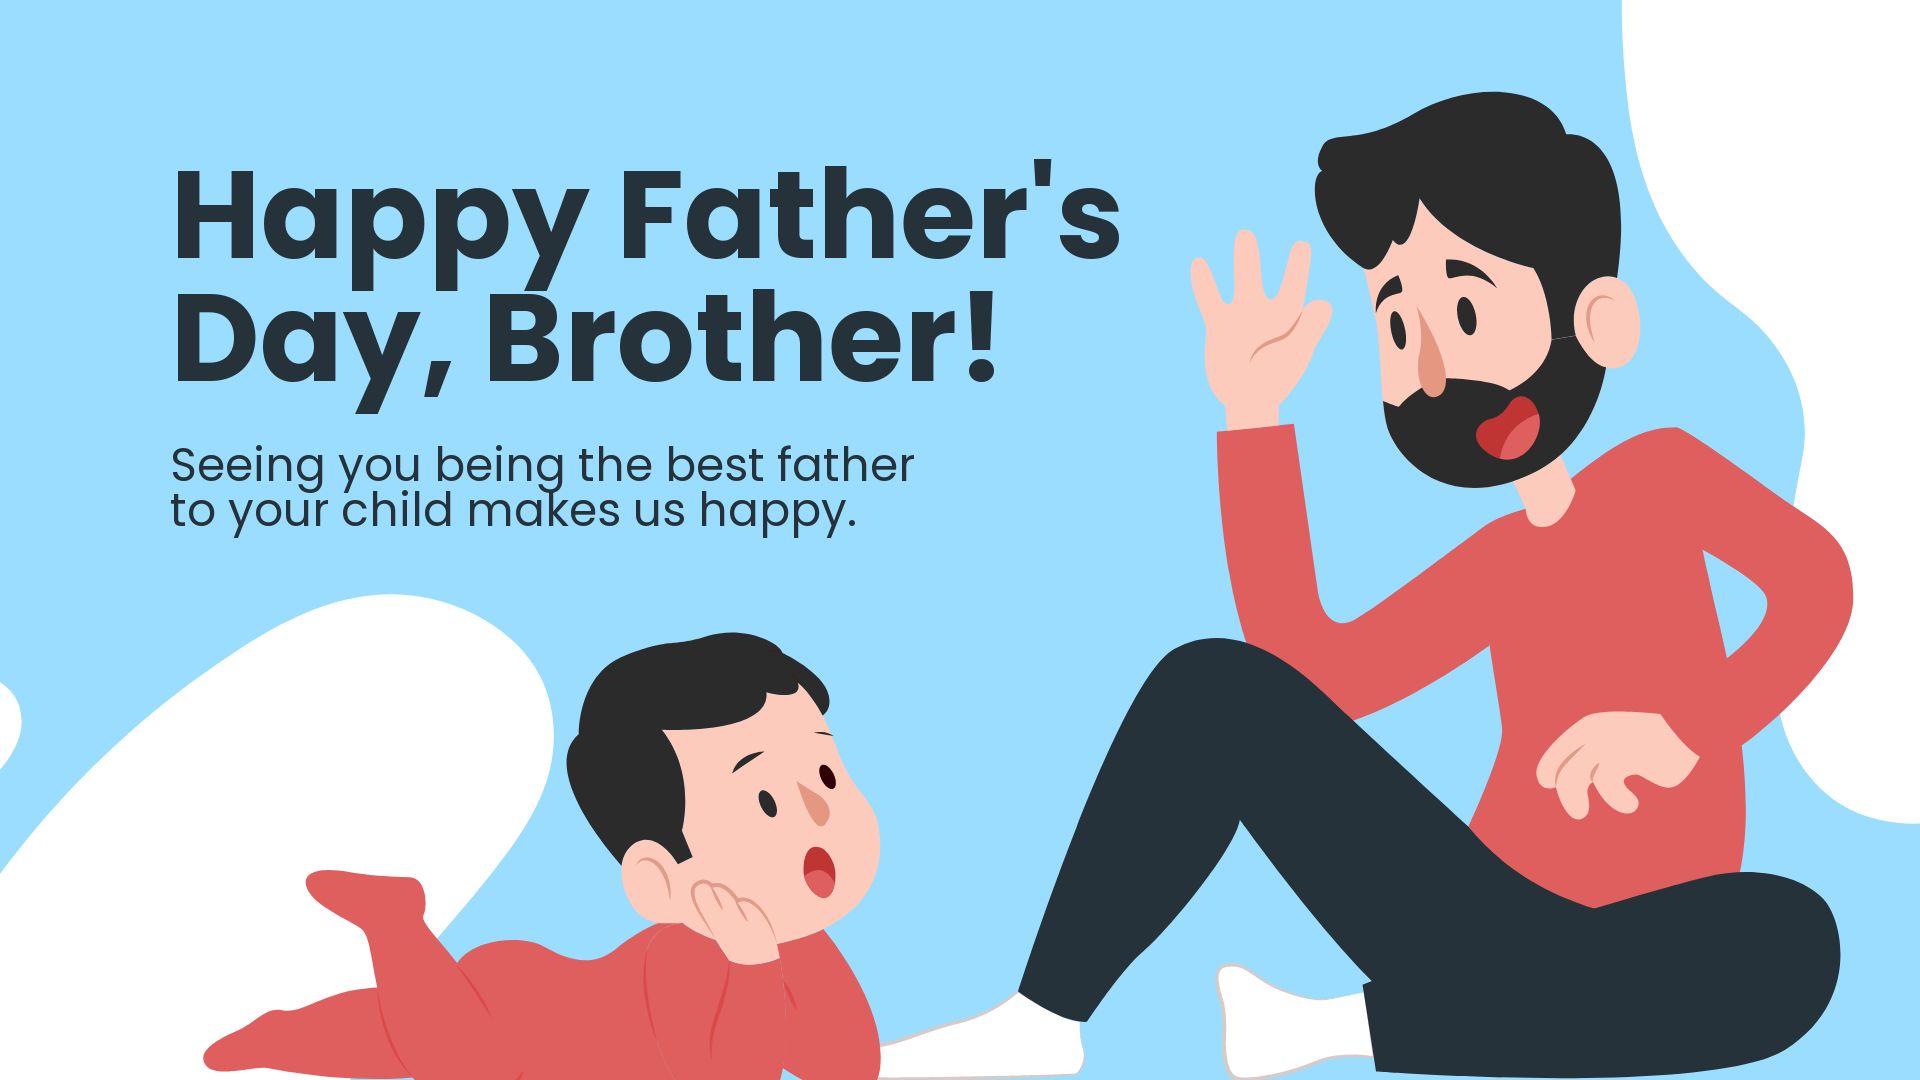 Happy Father's Day Brother Image in JPG